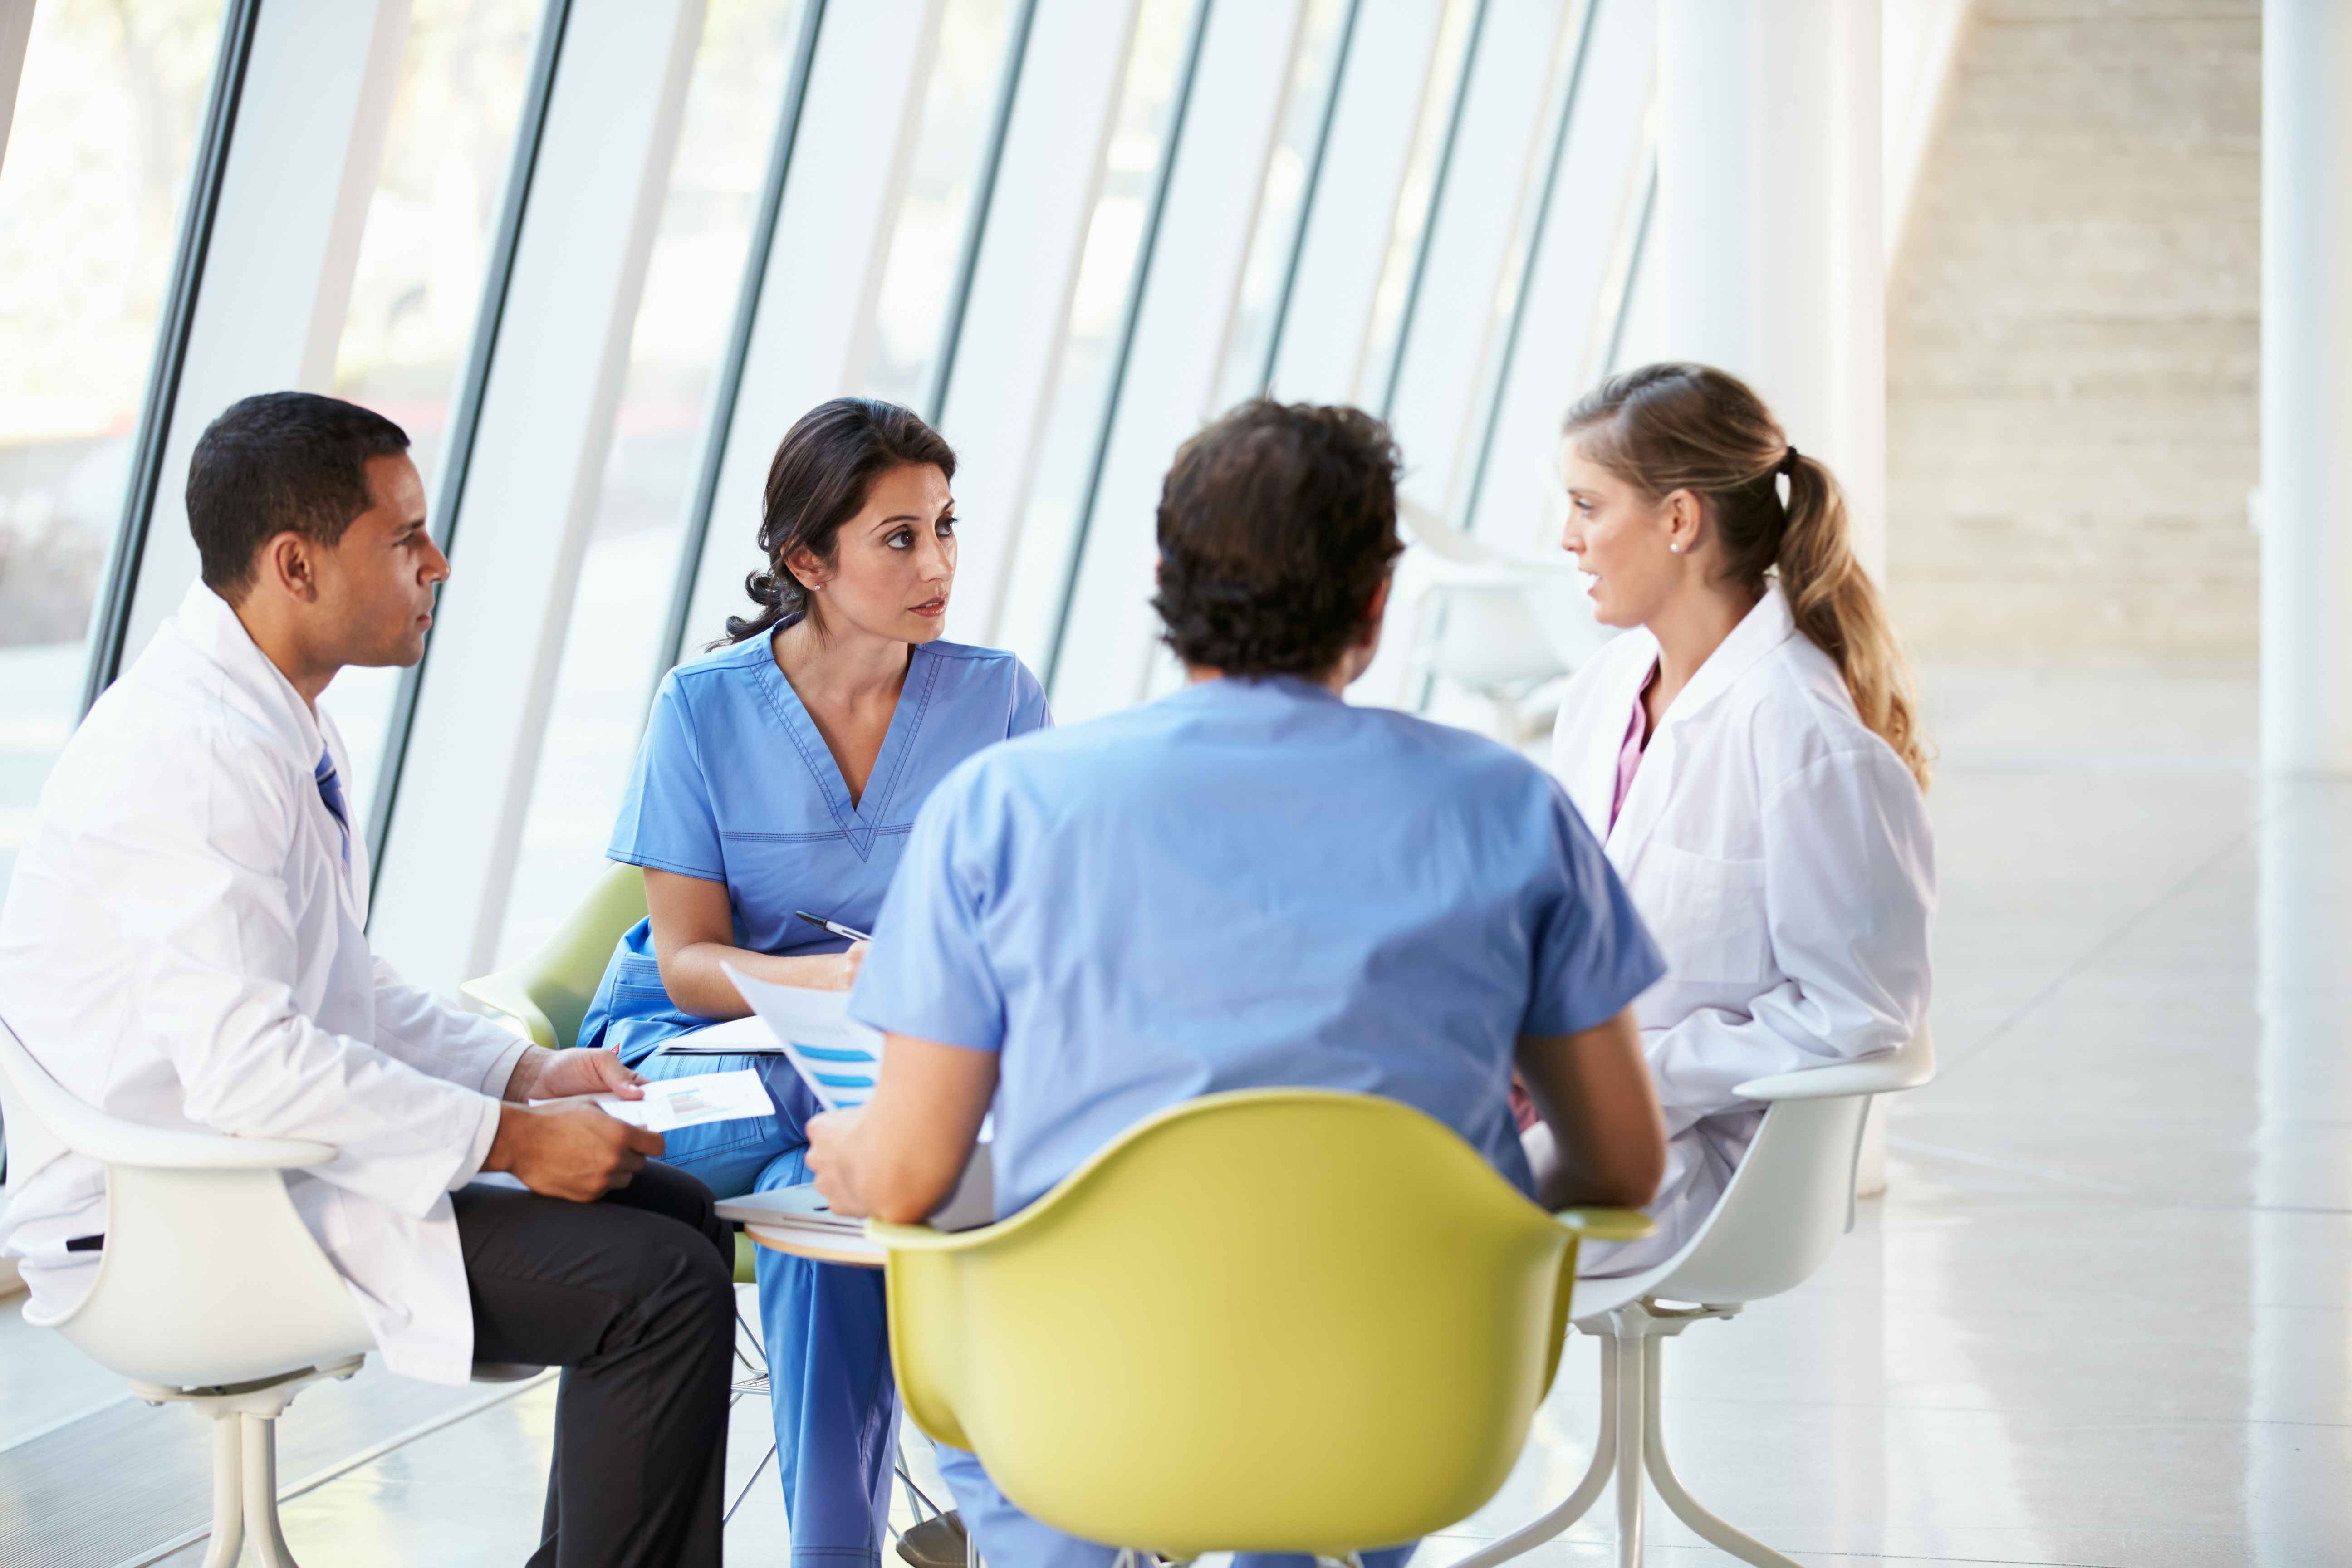 Group of medical professionals seated at a table together having a conversation